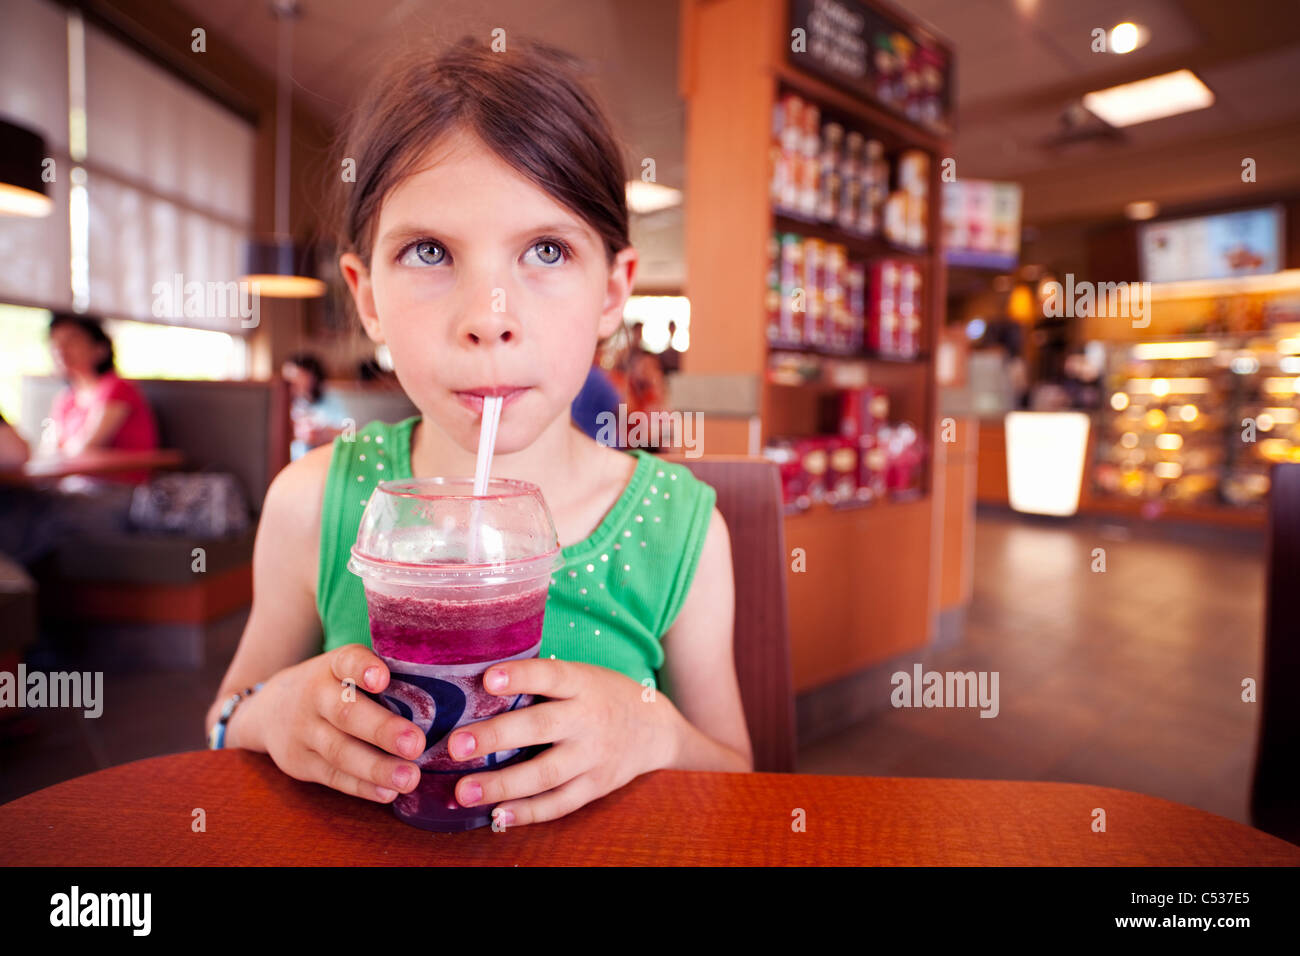 Girl drinking smoothie in coffee shop Banque D'Images